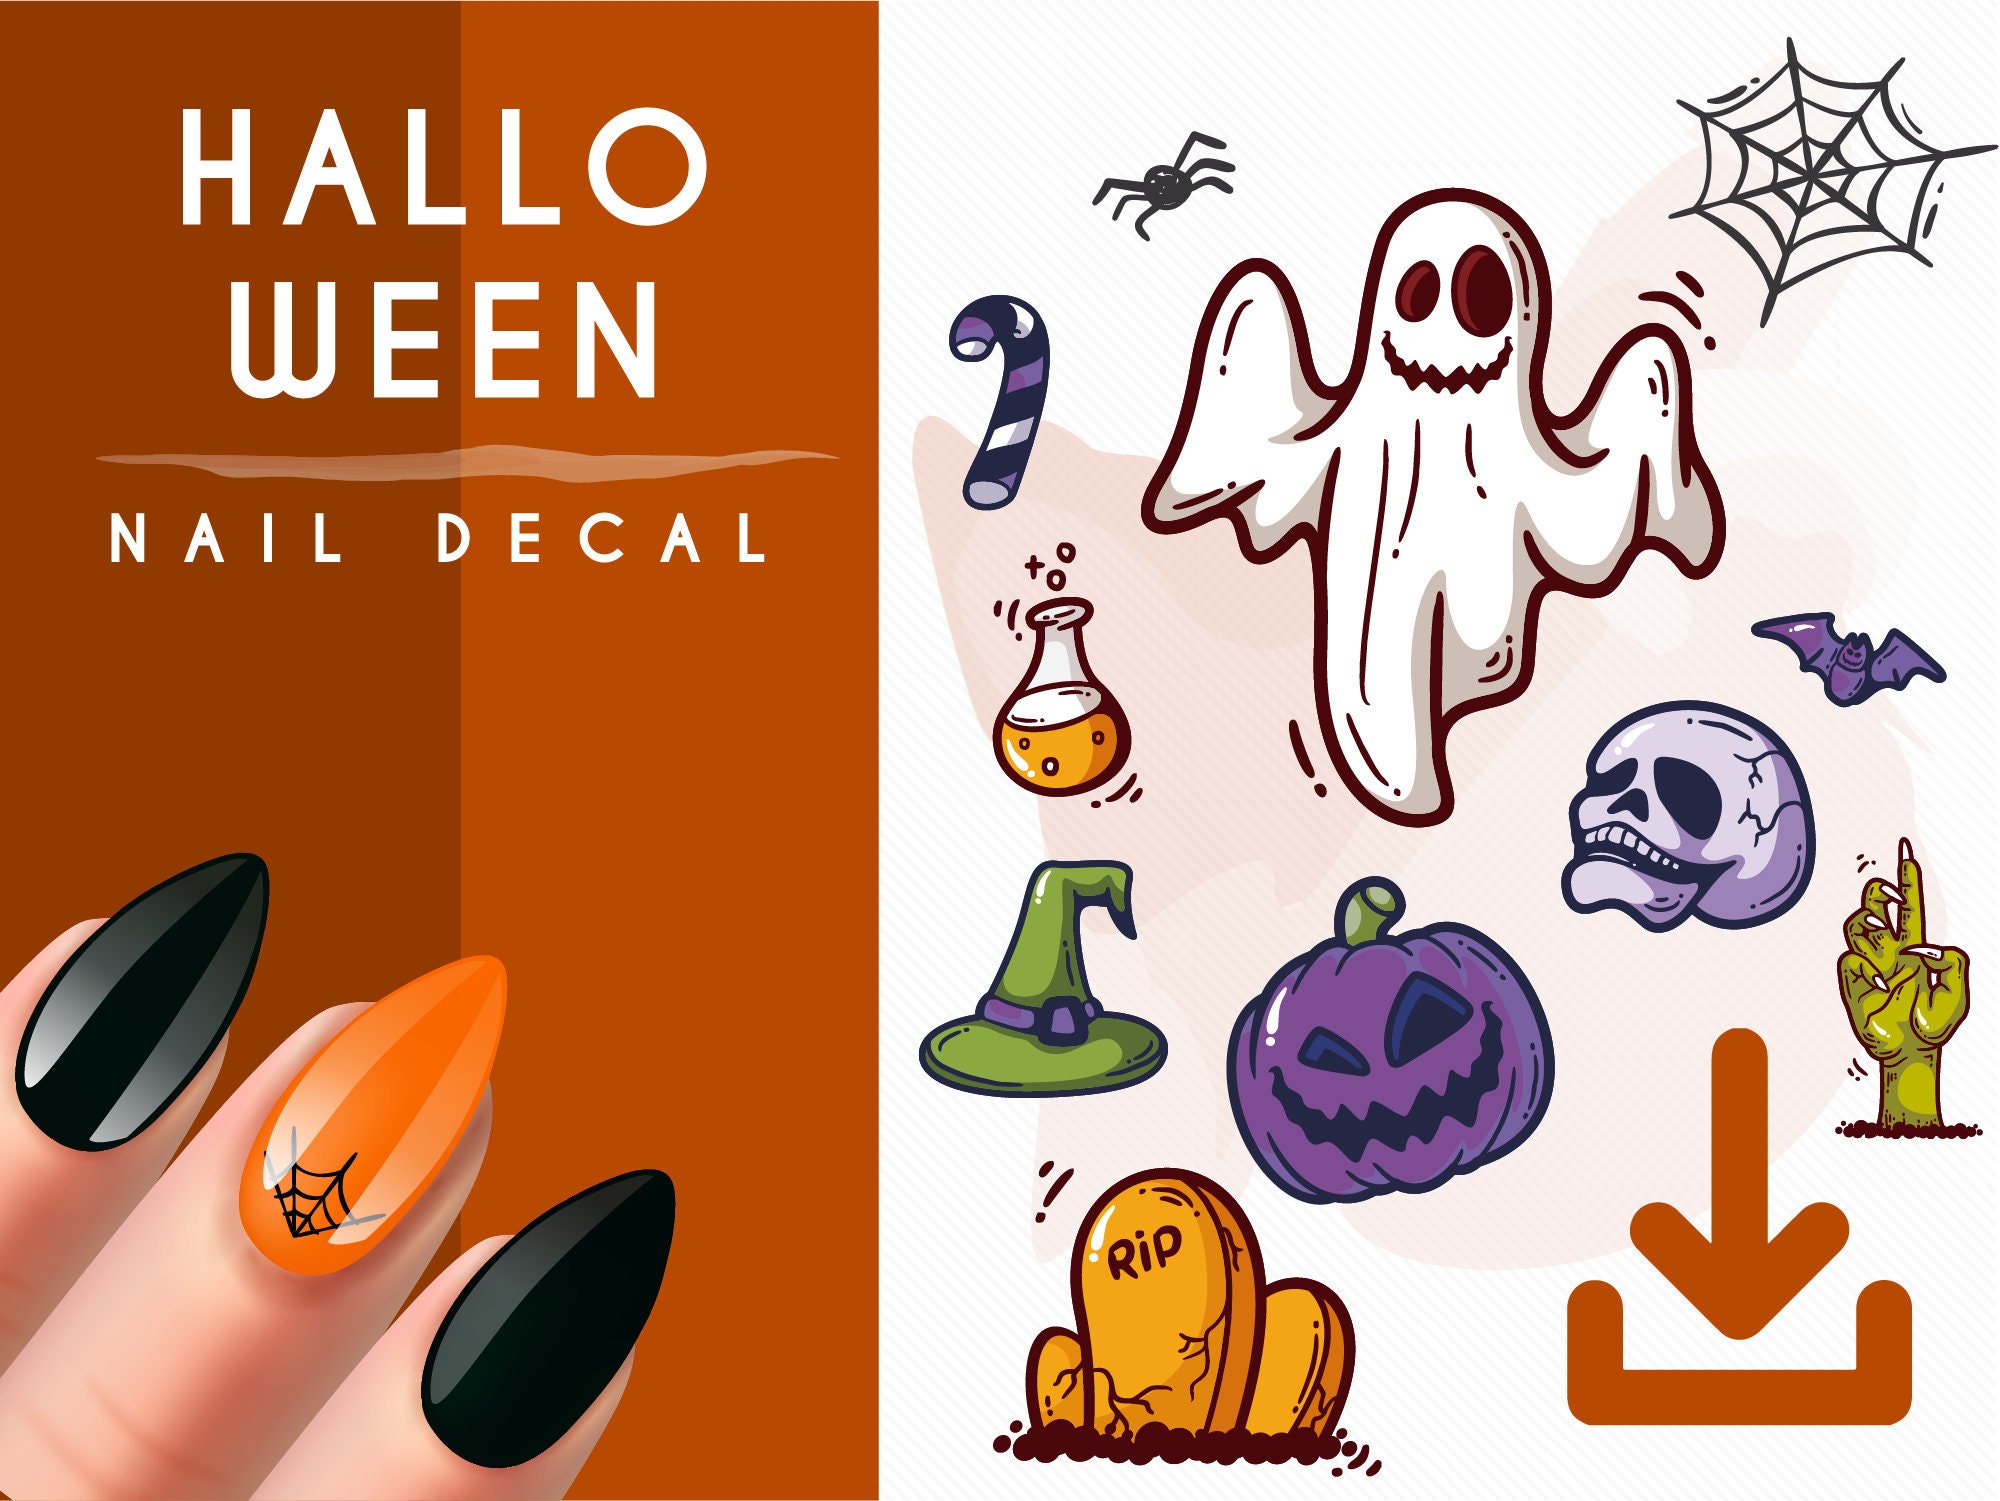 1. Halloween Nail Decal Designs by Etsy - wide 8